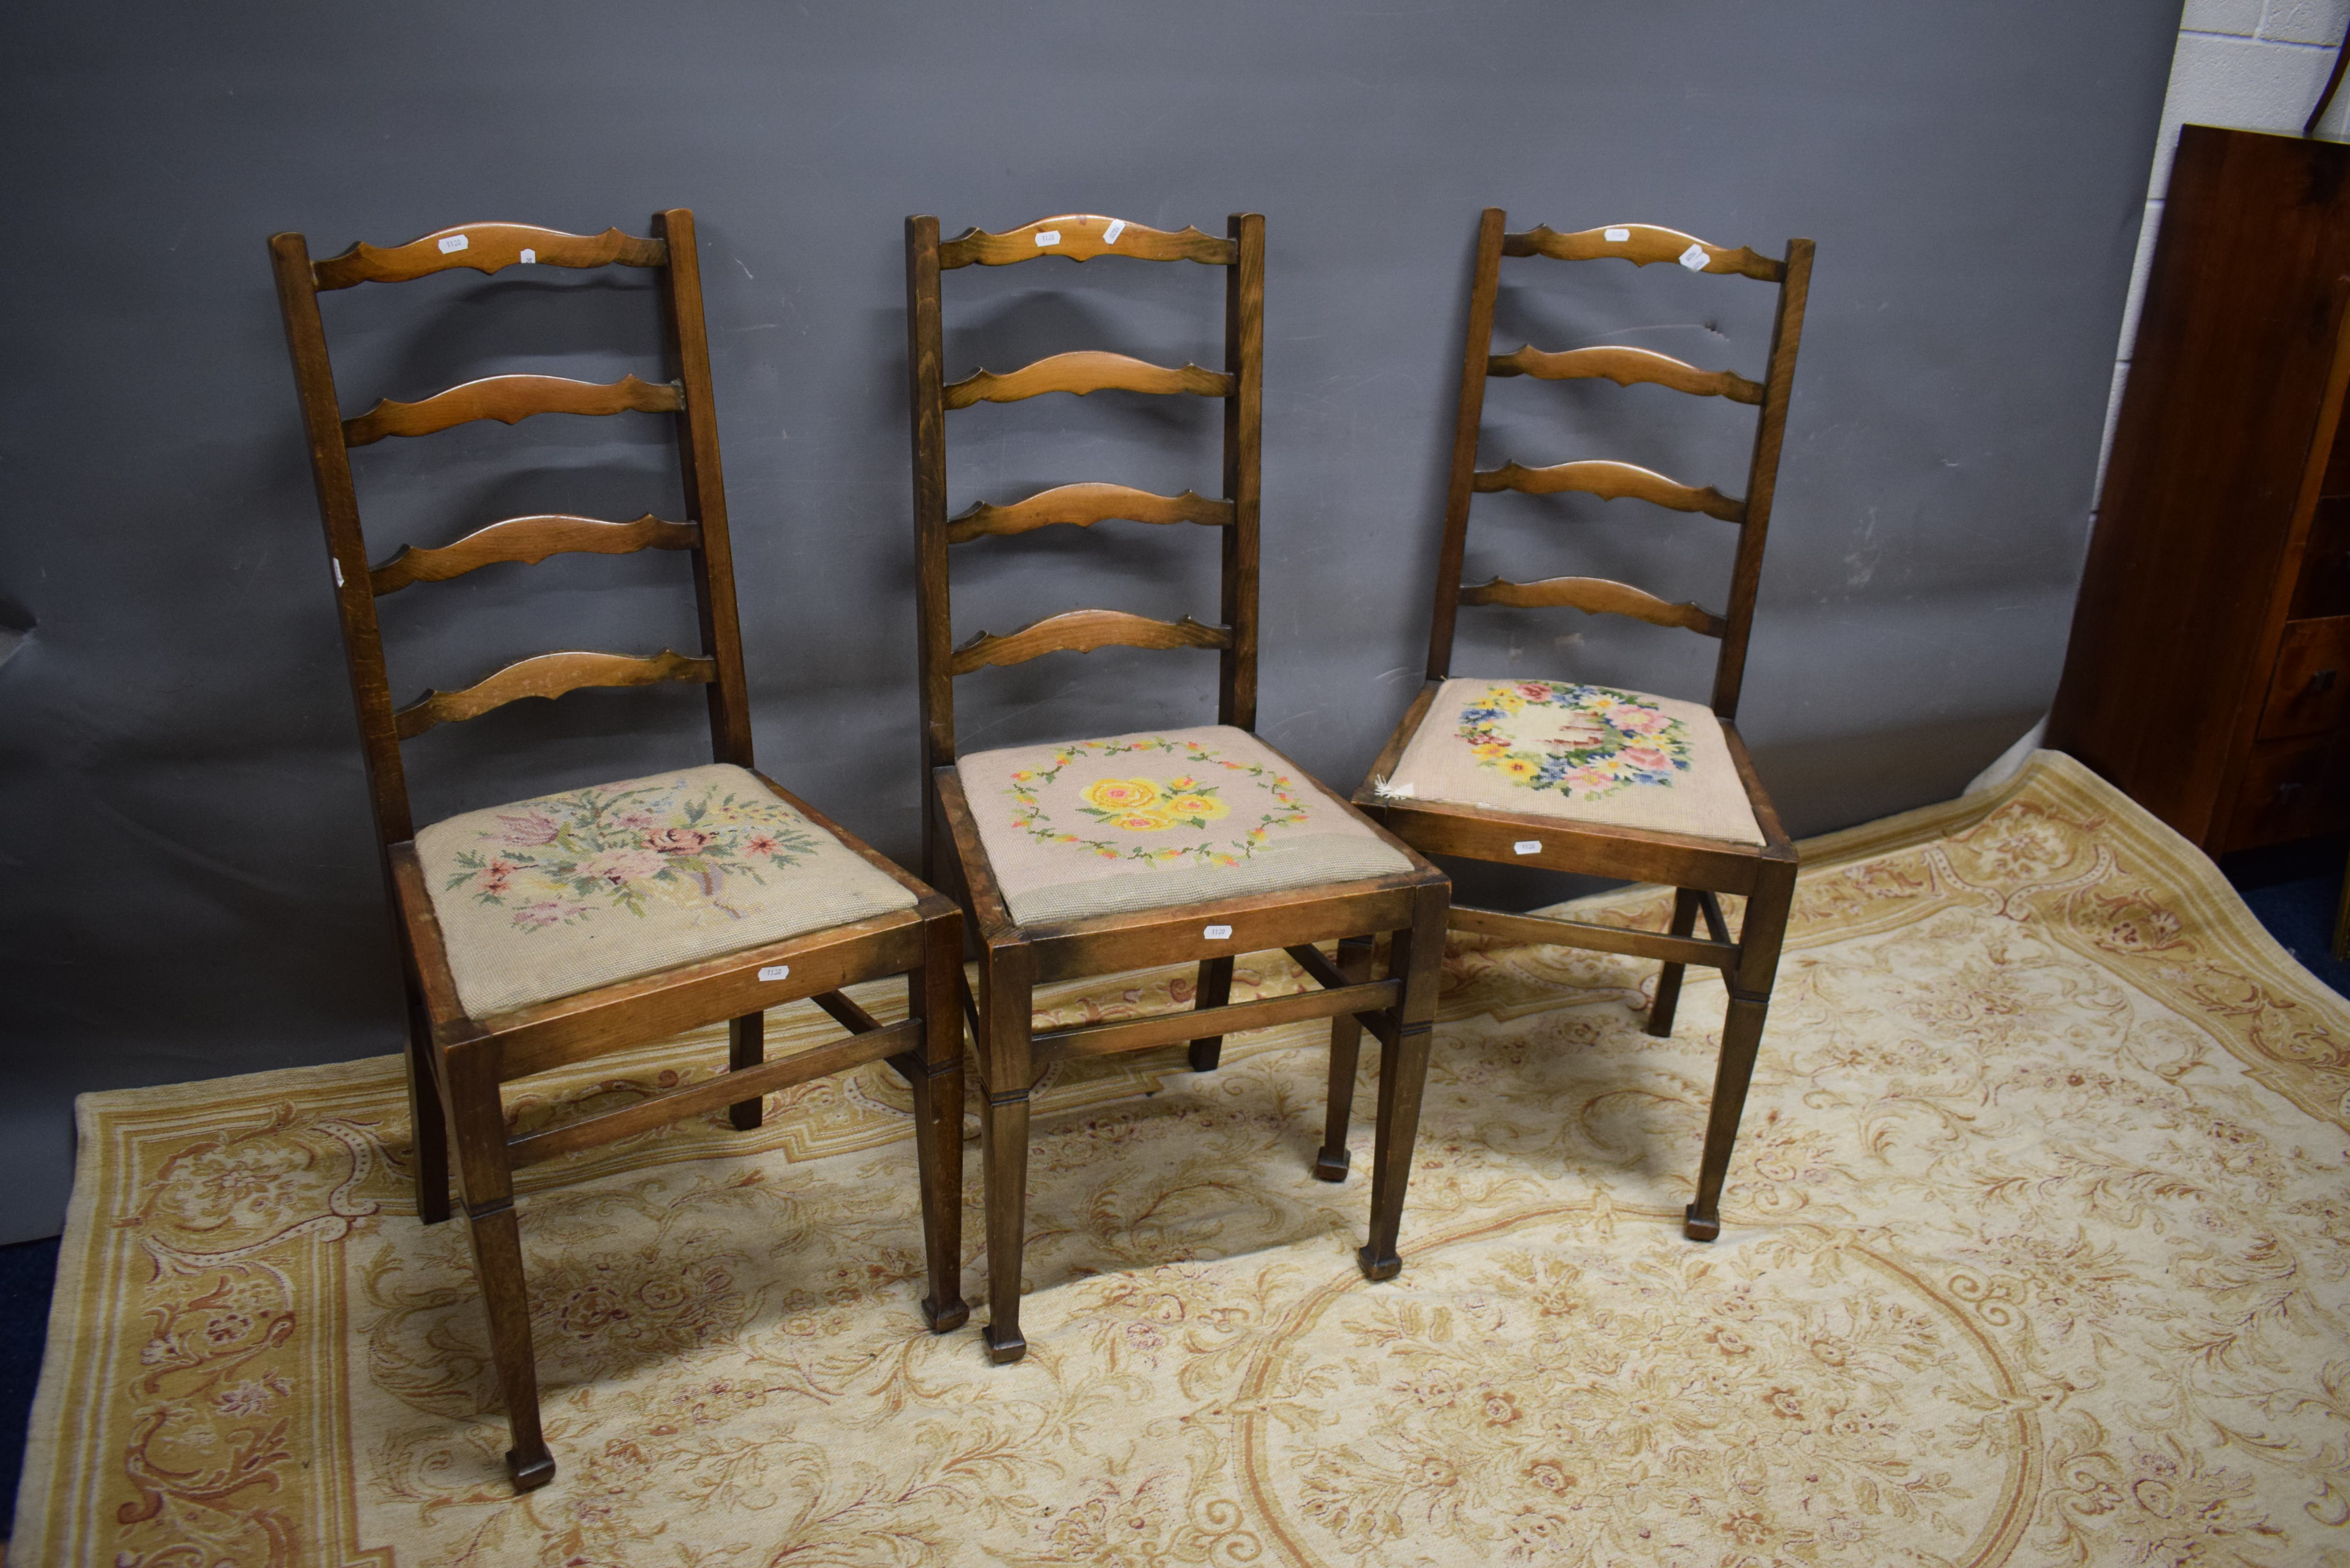 Three Ladderback chairs with needlpoint decoration.  See photos. S2